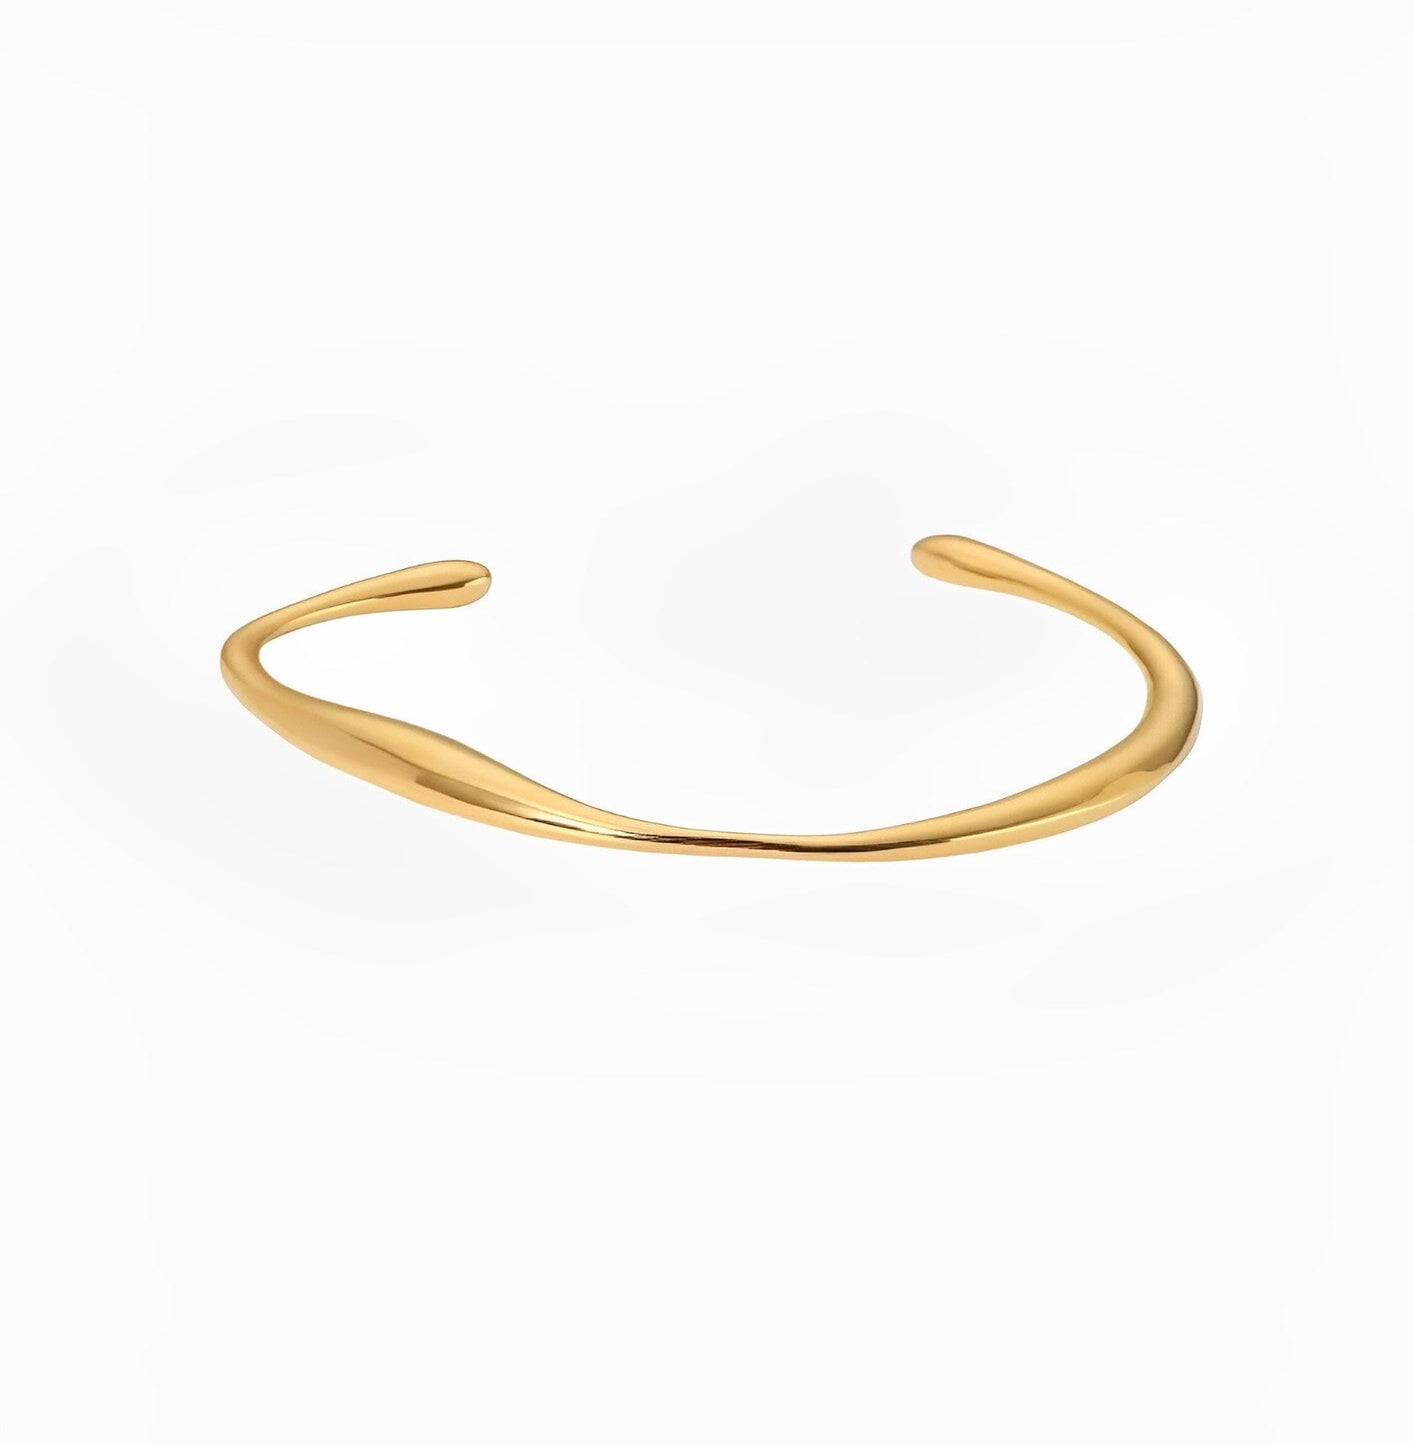 BAN BRACELET braclet Yubama Jewelry Online Store - The Elegant Designs of Gold and Silver ! 